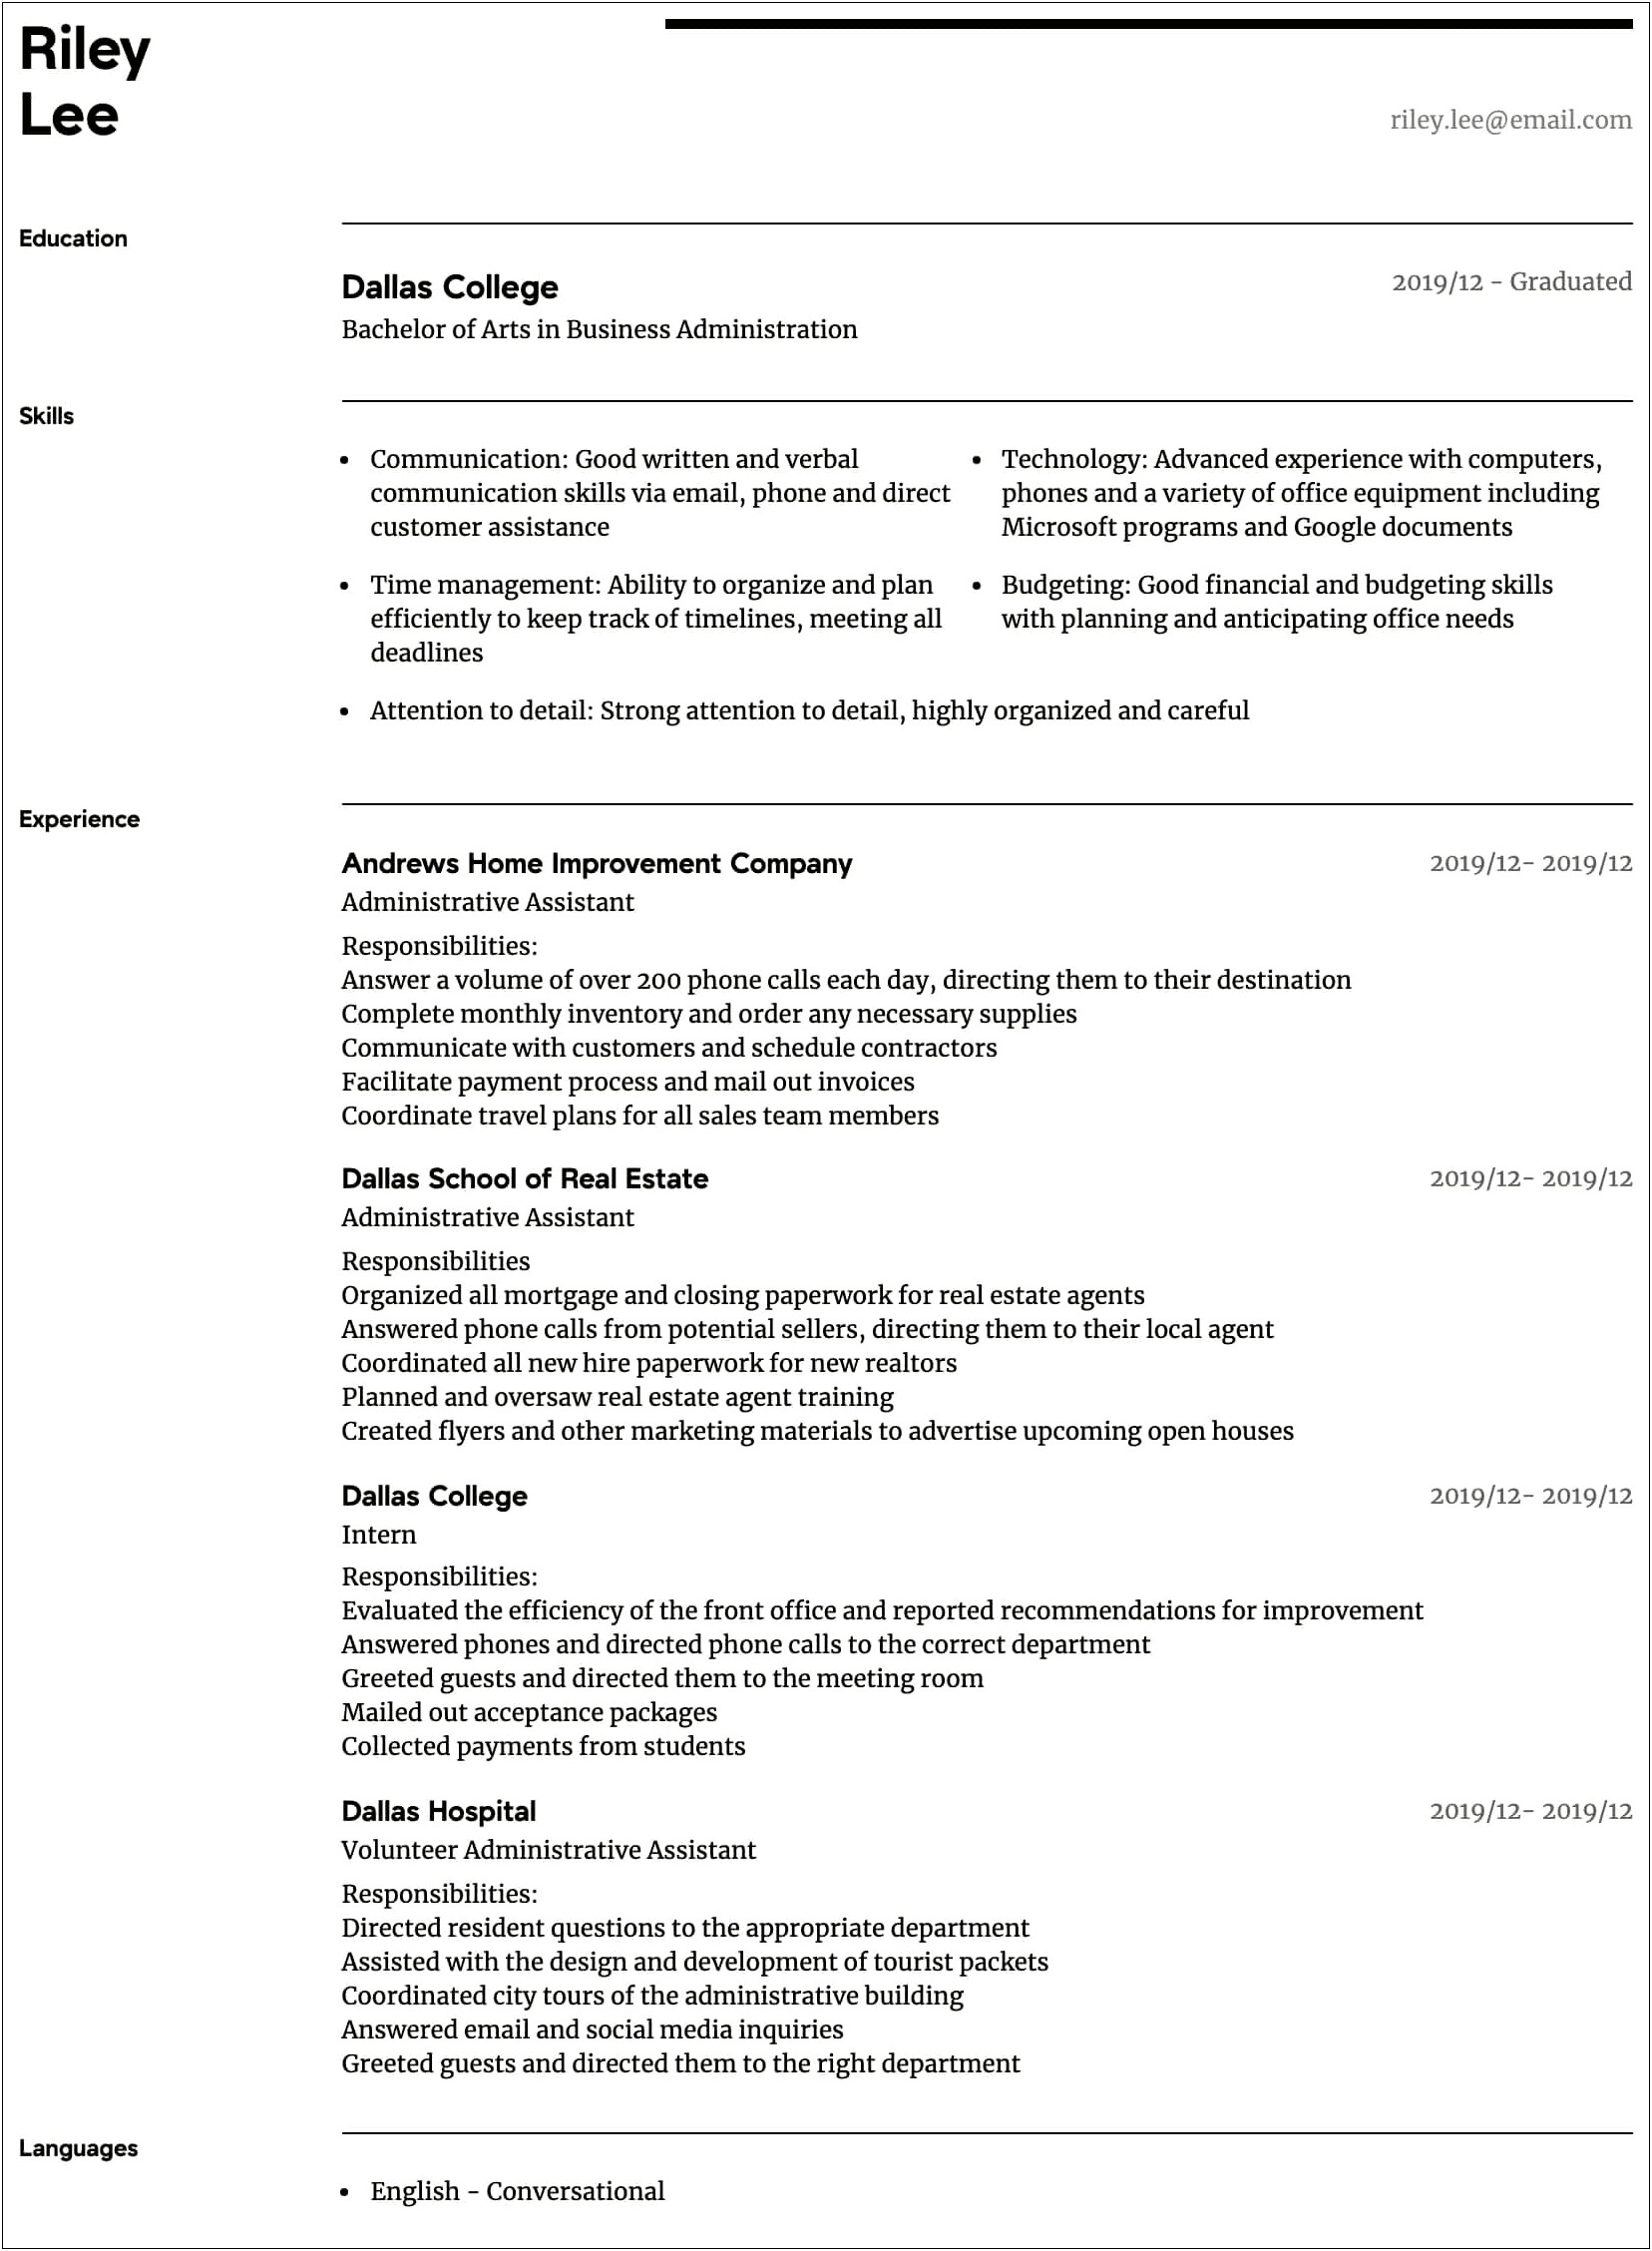 Resume Samples For Administrative Jobs